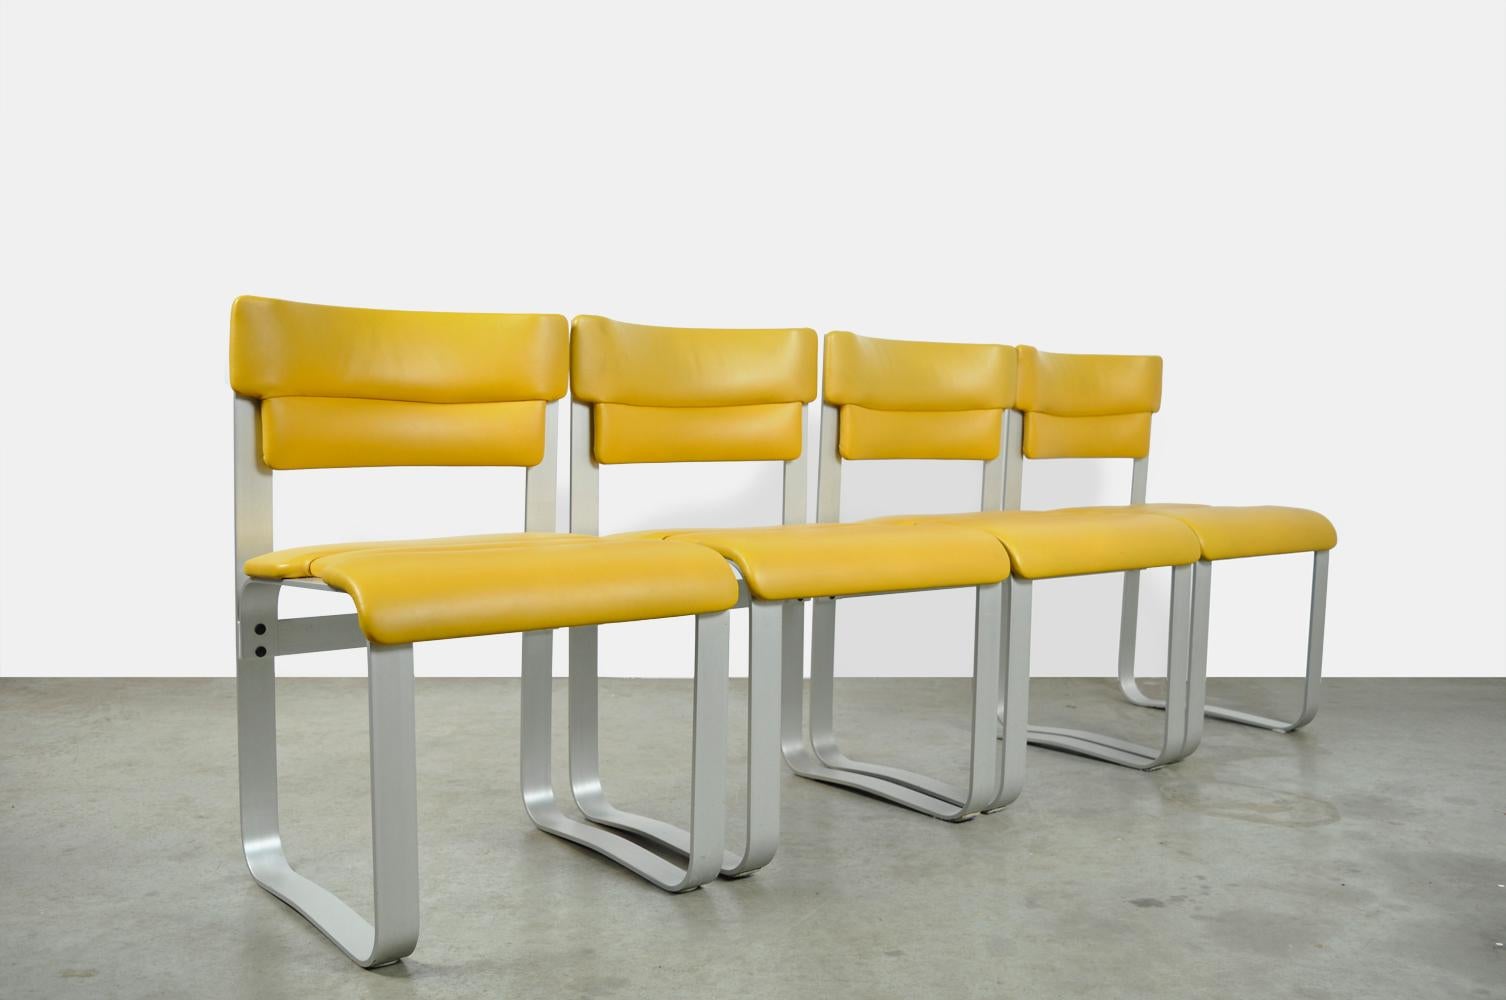 Rare set of 4 dining room chairs attributed to the Finnish designer Ilmar Lappalainen and Asko, 1960s Finland. The special chairs have a curved anodized aluminum frame with yellow leatherette seat and backrests. The seats are not marked. The modern